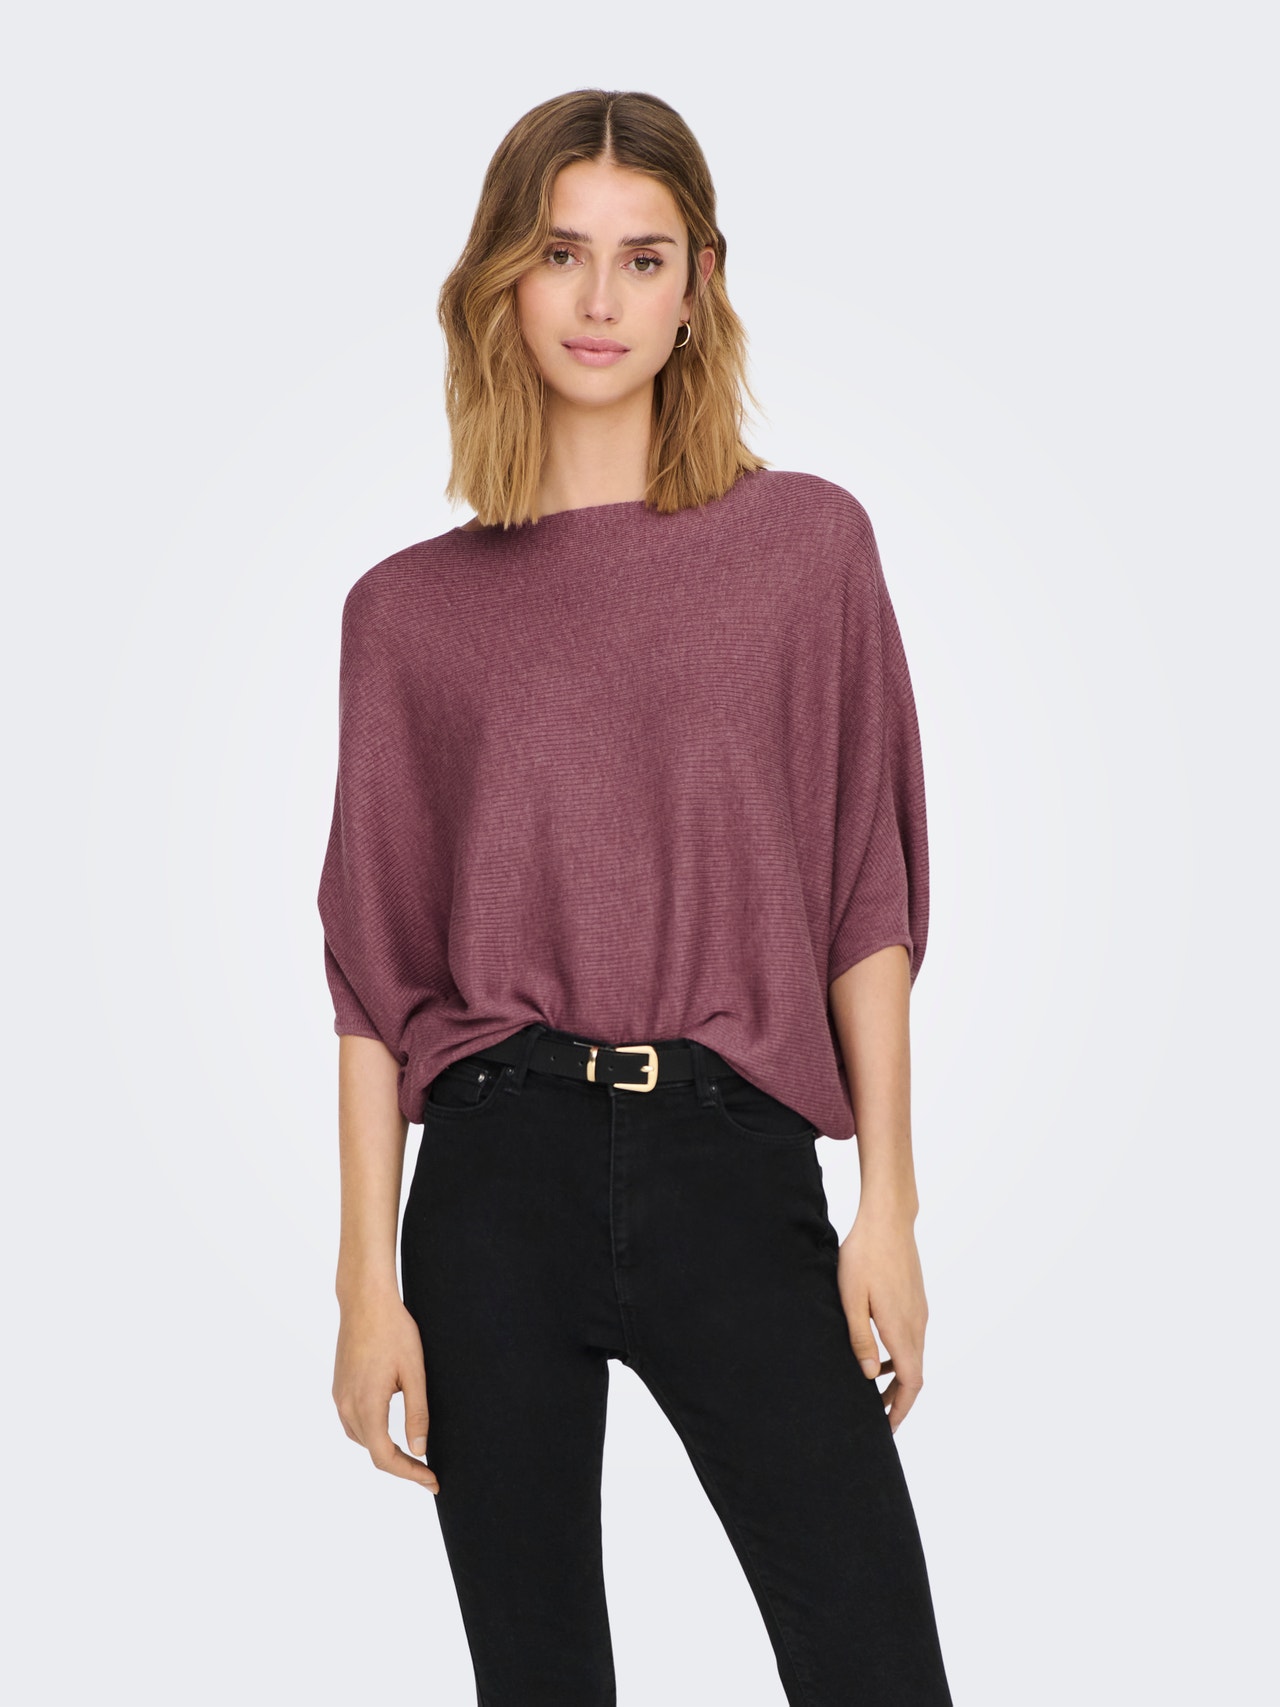 ONLY Pull-overs Col bateau Épaules tombantes -Crushed Berry - 15181237